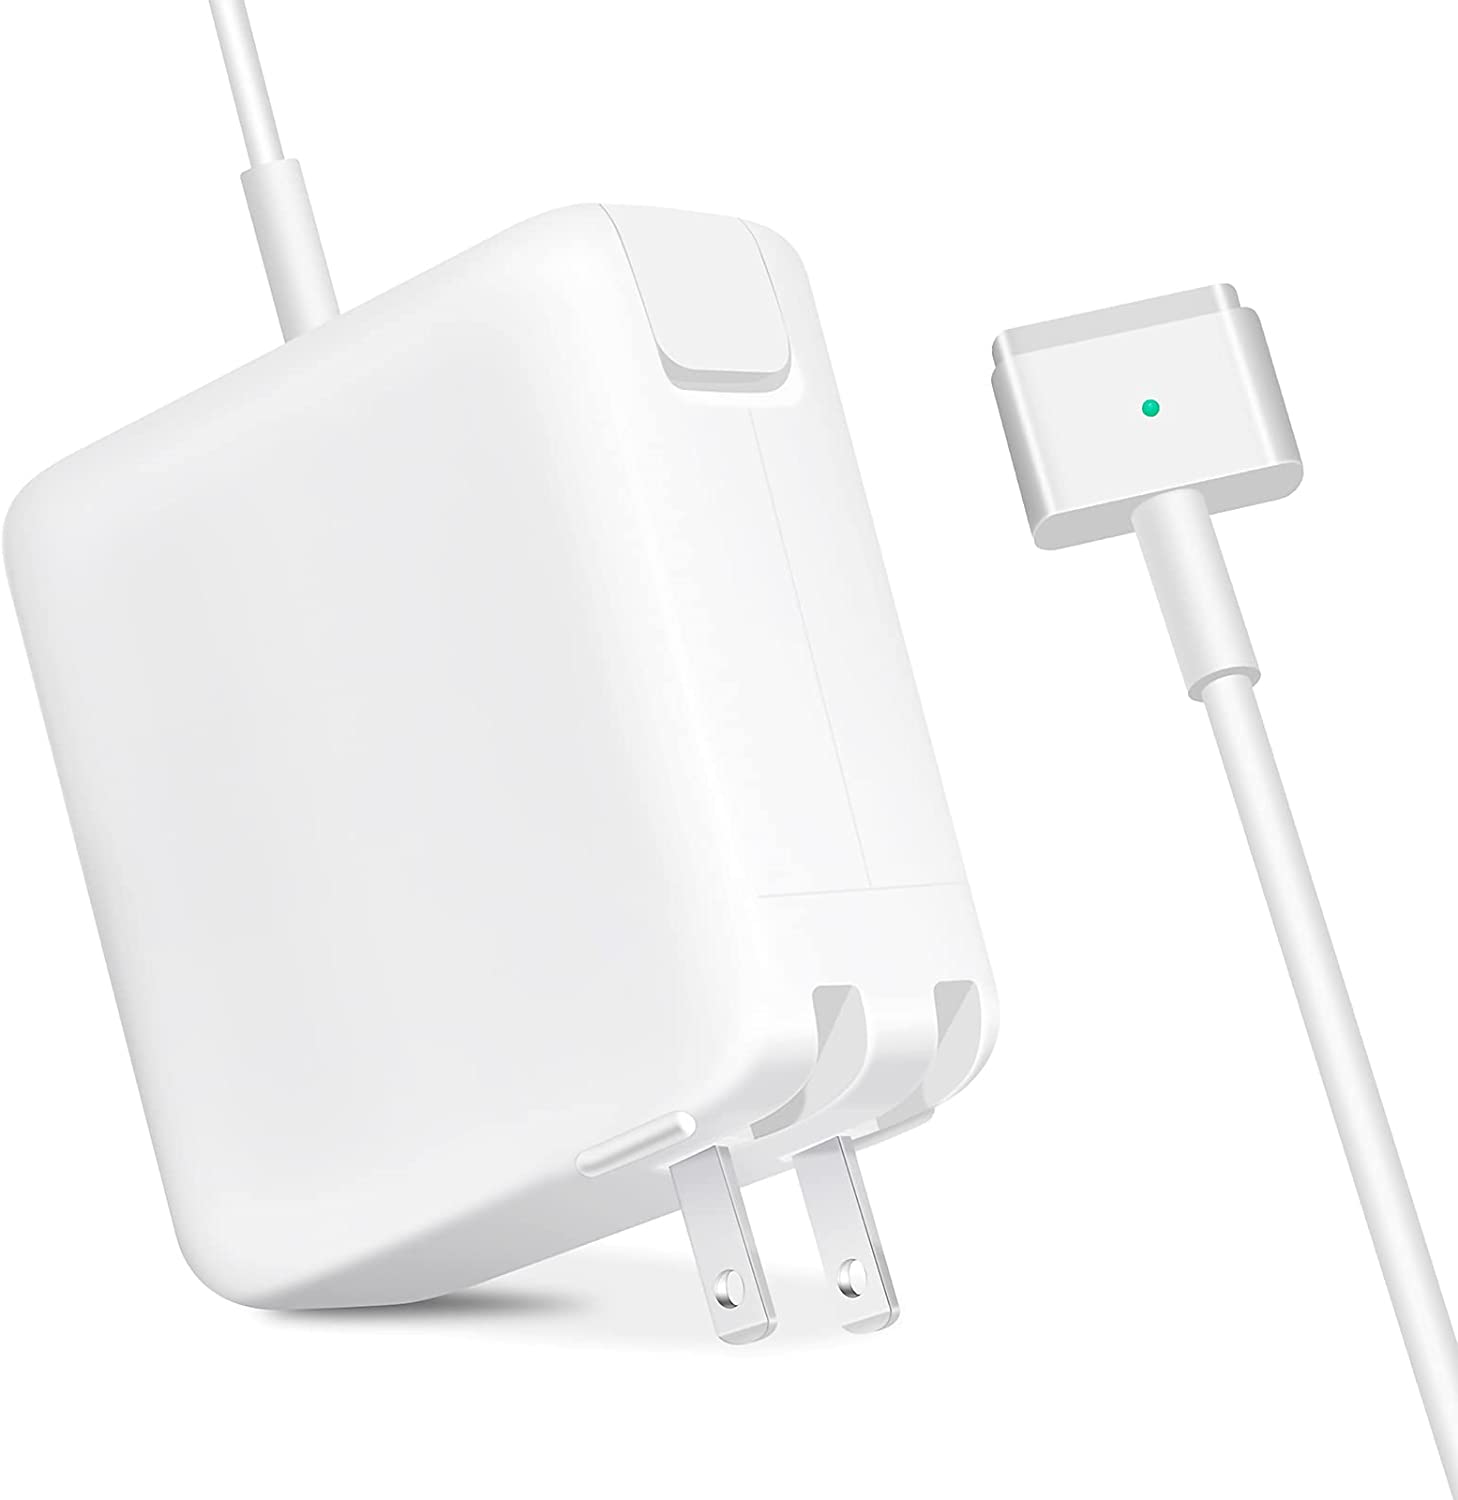 Tanke Snuble Læsbarhed Macbook Charger - 45W Magsafe 2 Power Adapter for MacBook Air 2012 - 2